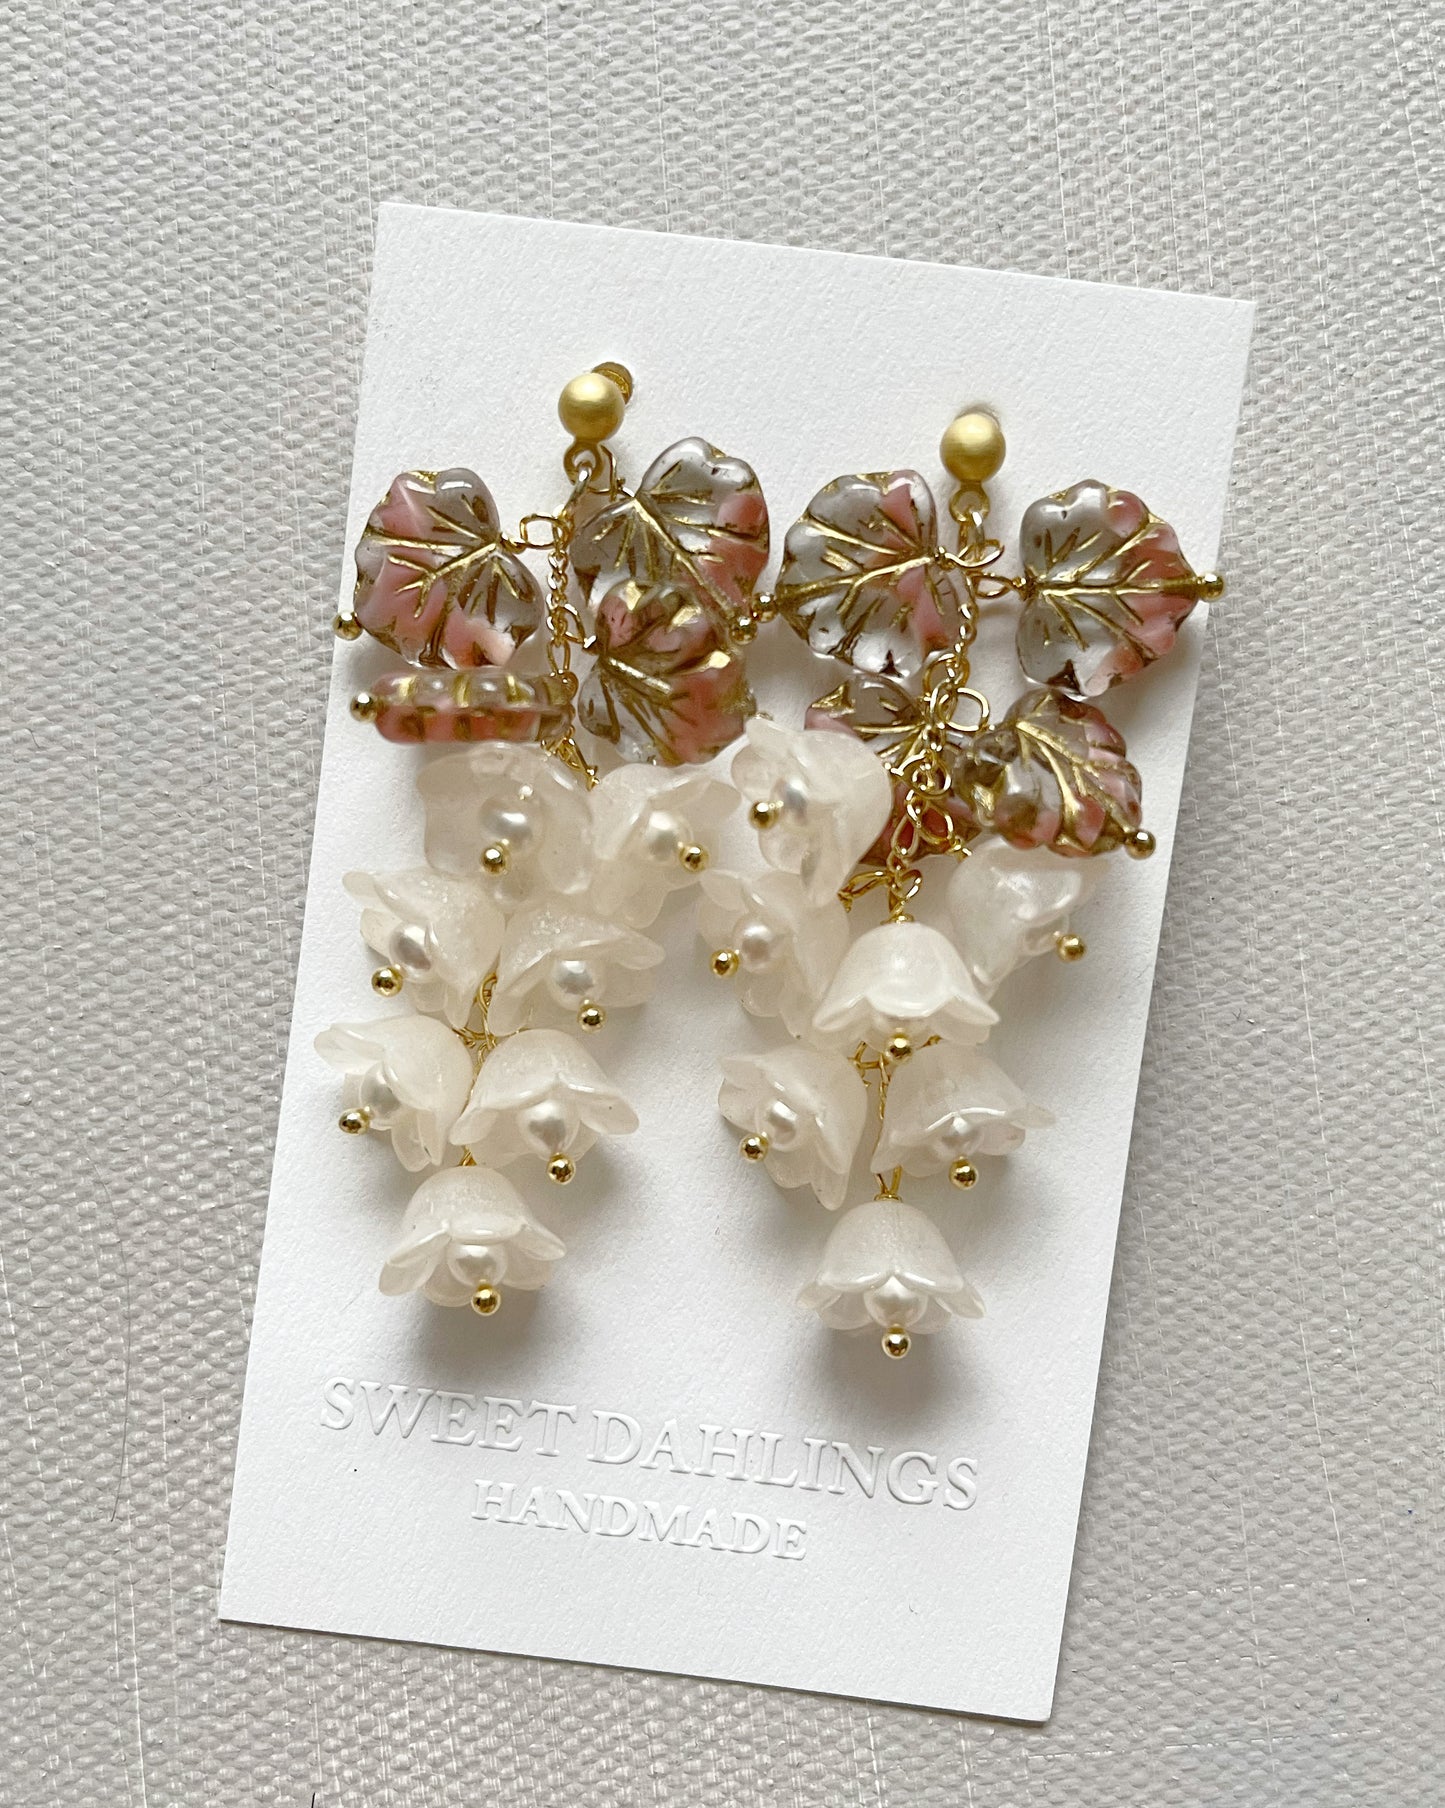 Canterbury bell flowers earrings in cream and maple leaves